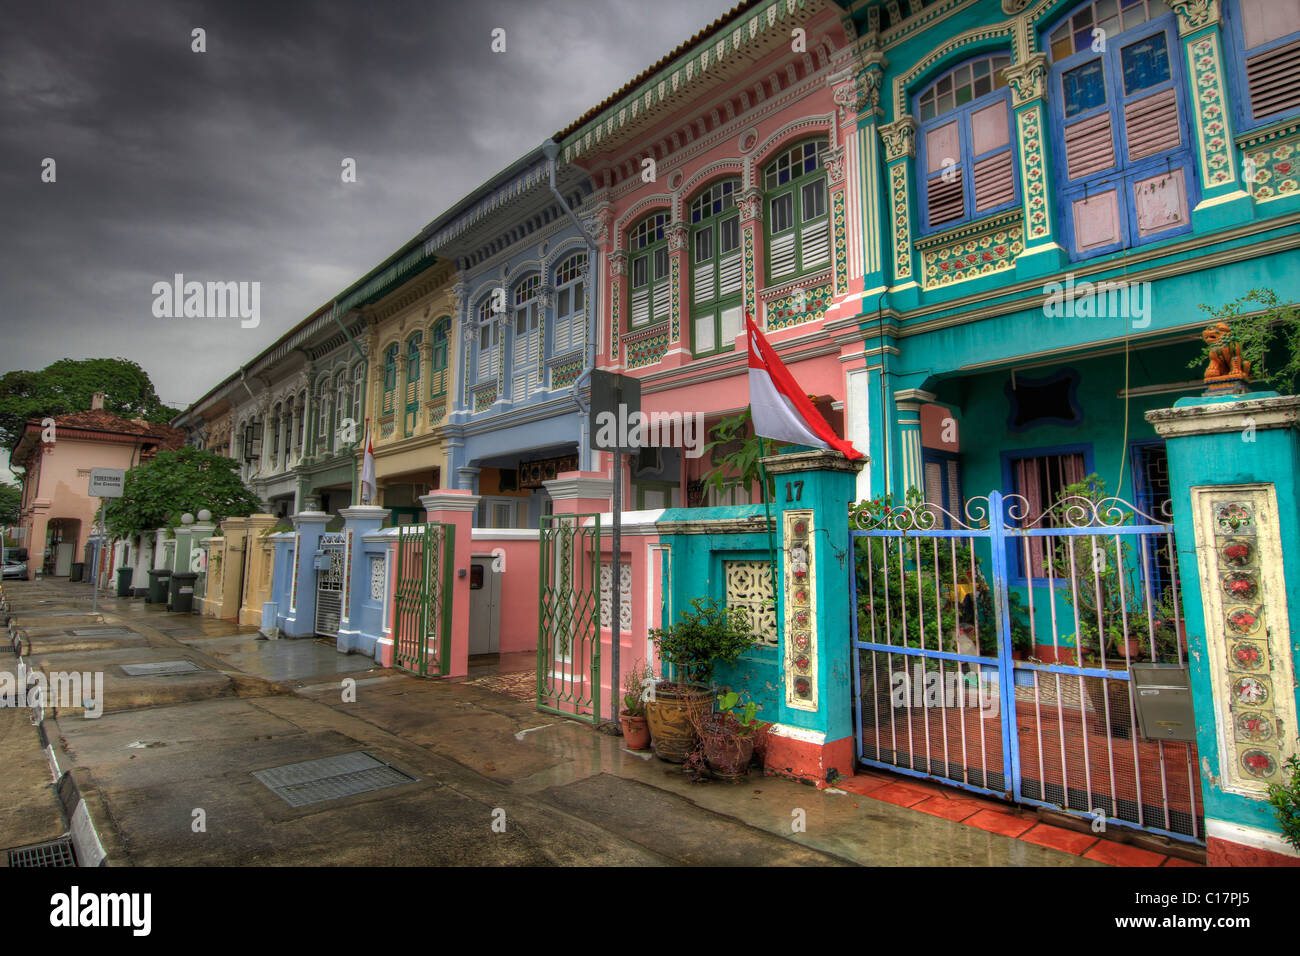 Historic Colorful Peranakan Terrace House in Singapore 3 Stock Photo